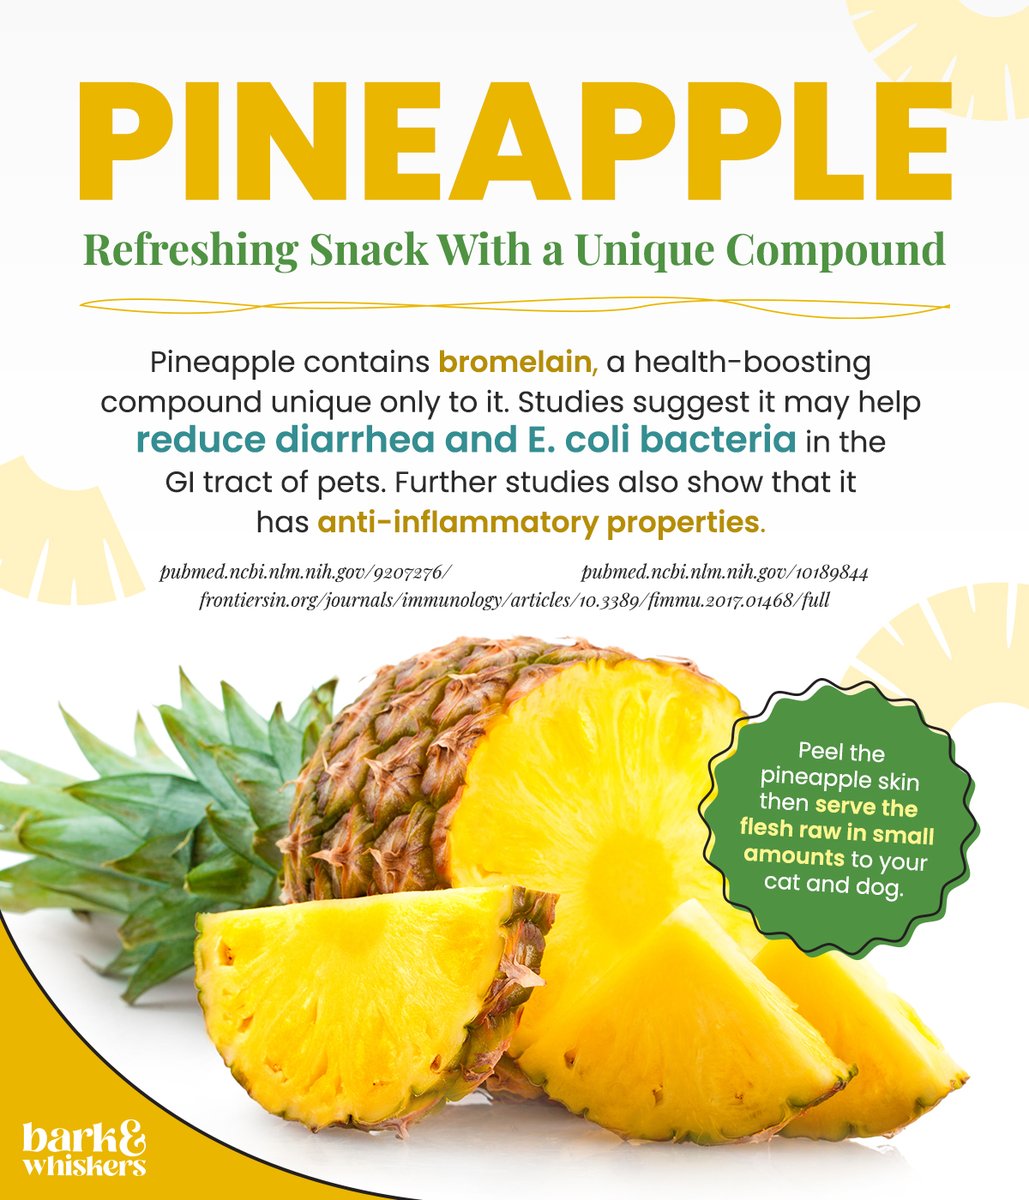 This refreshing tropical fruit can be a great addition to your dog’s and cat’s list of healthy, natural snacks. 👍Try offering your pet a bite! 🍍😋 Learn more about the nutritional benefits of pineapple here: bit.ly/3UeGFNU #Pineapple #PetTreat #Dog #Cat